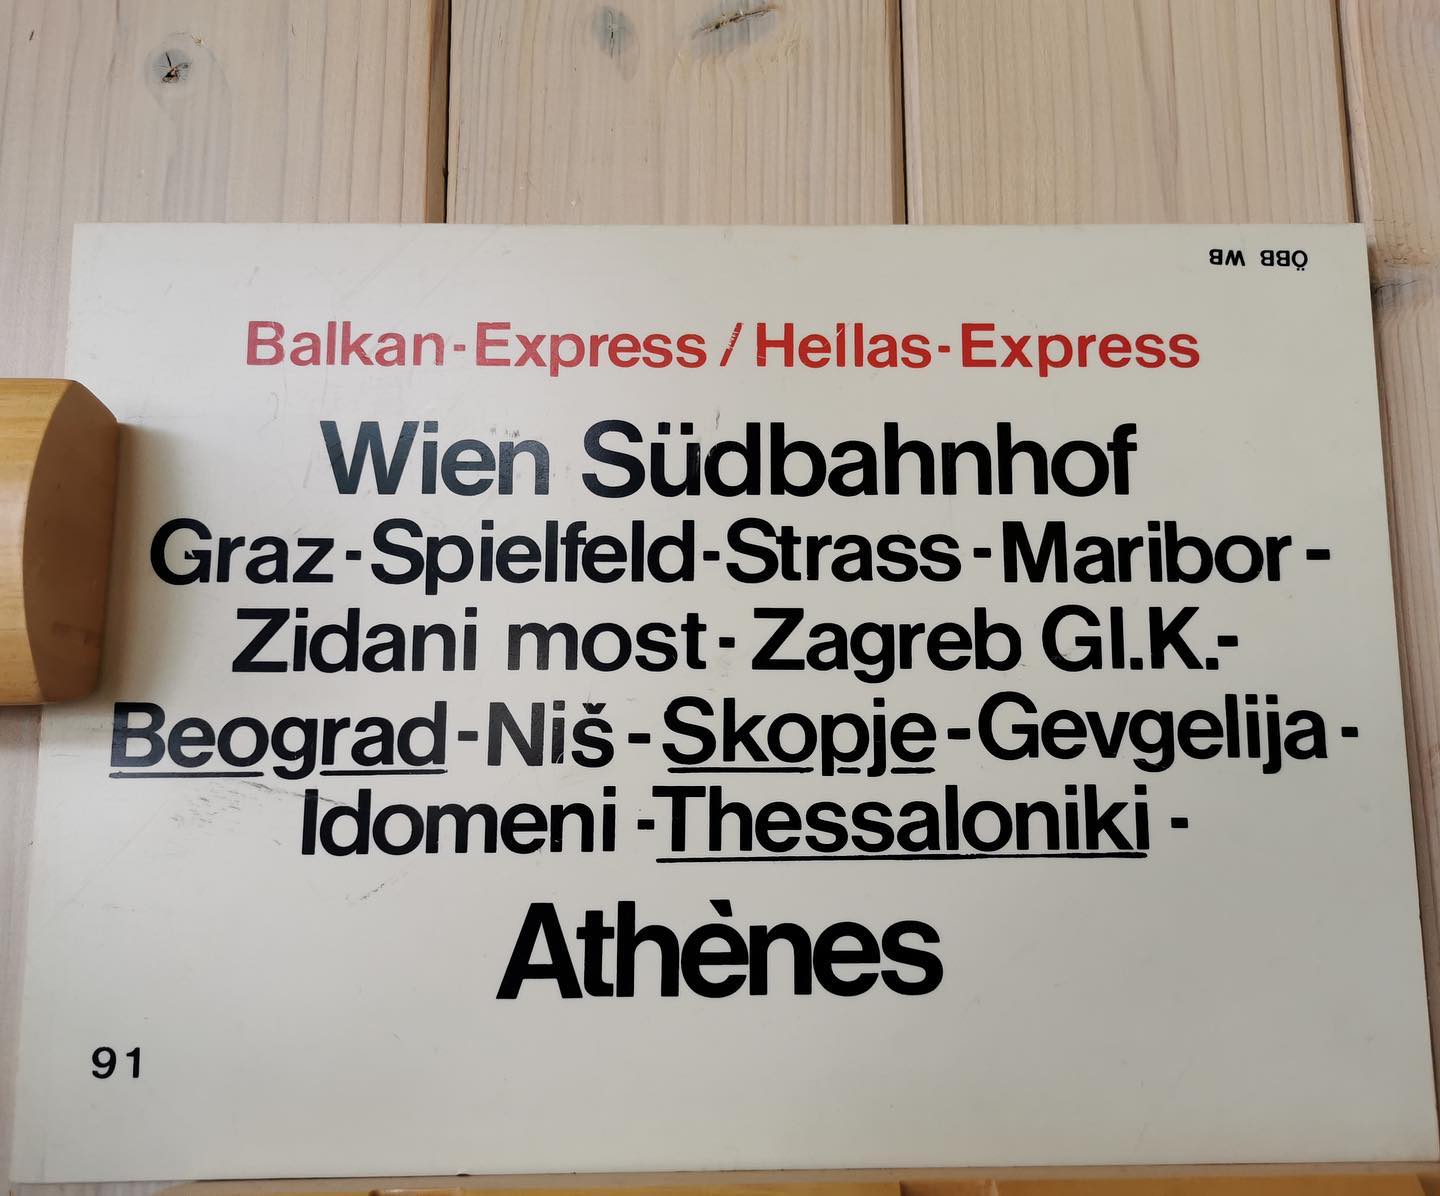 Sent to us by Walter Weiss. What a trip! #BalkanExpress #HellasExpress